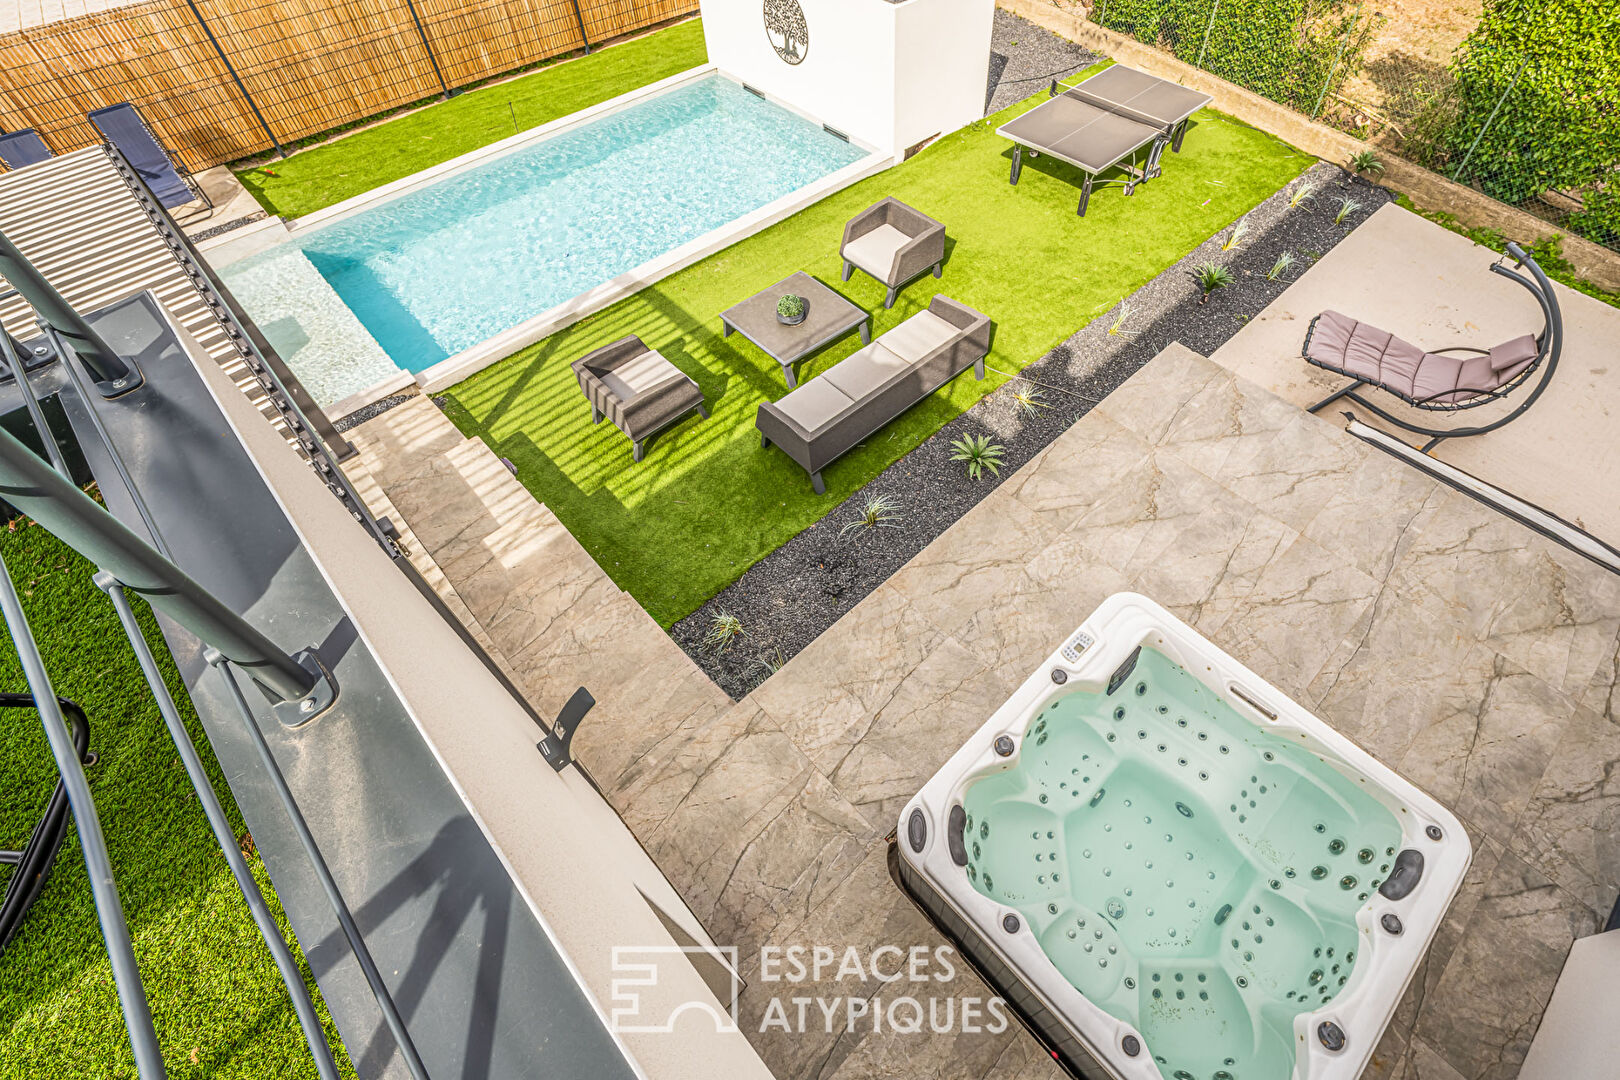 Superb contemporary villa with swimming pool and landscaped garden.